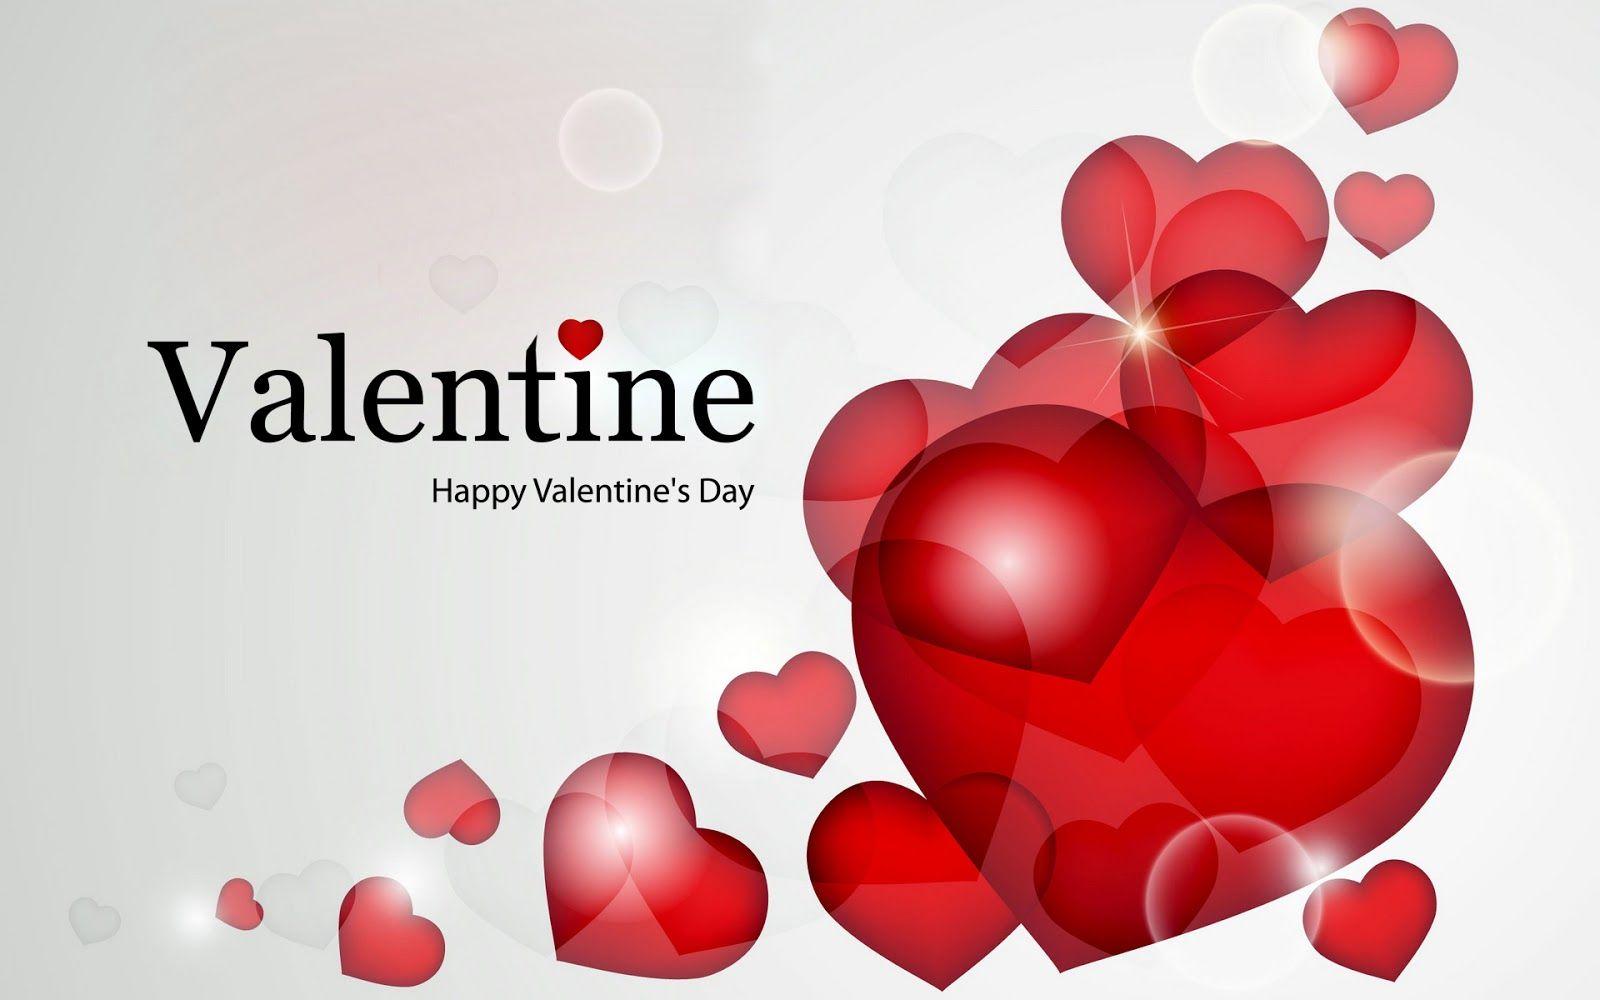 Valentines Day Image 2020 and HD Wallpaper